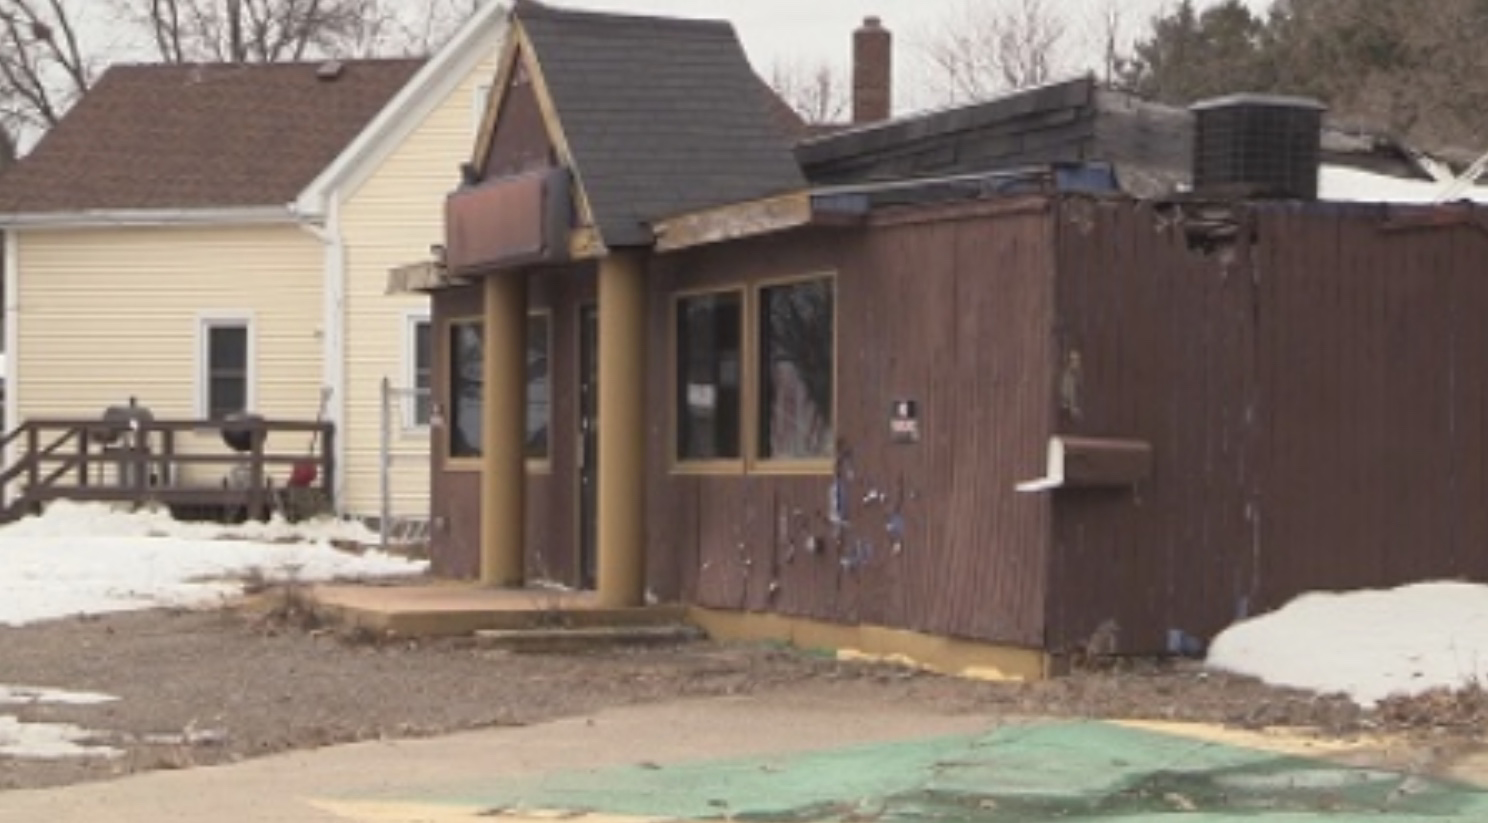 Days numbered for former Tomahawk gas station